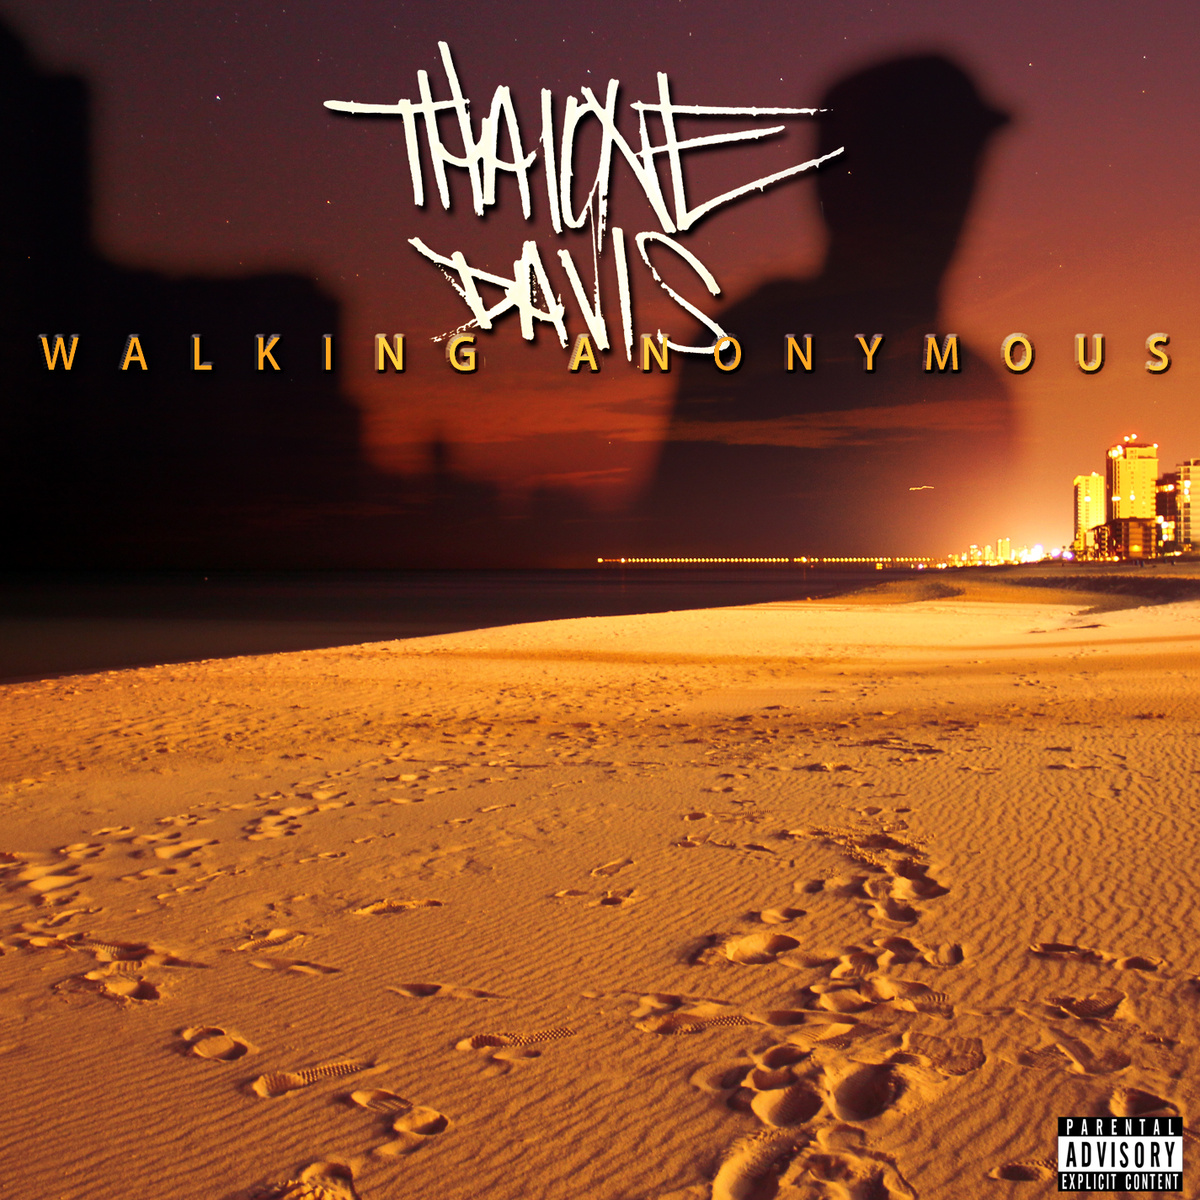 Thaione Davis - "Walking Anonymous" (Release) & "For Instance" (Video)